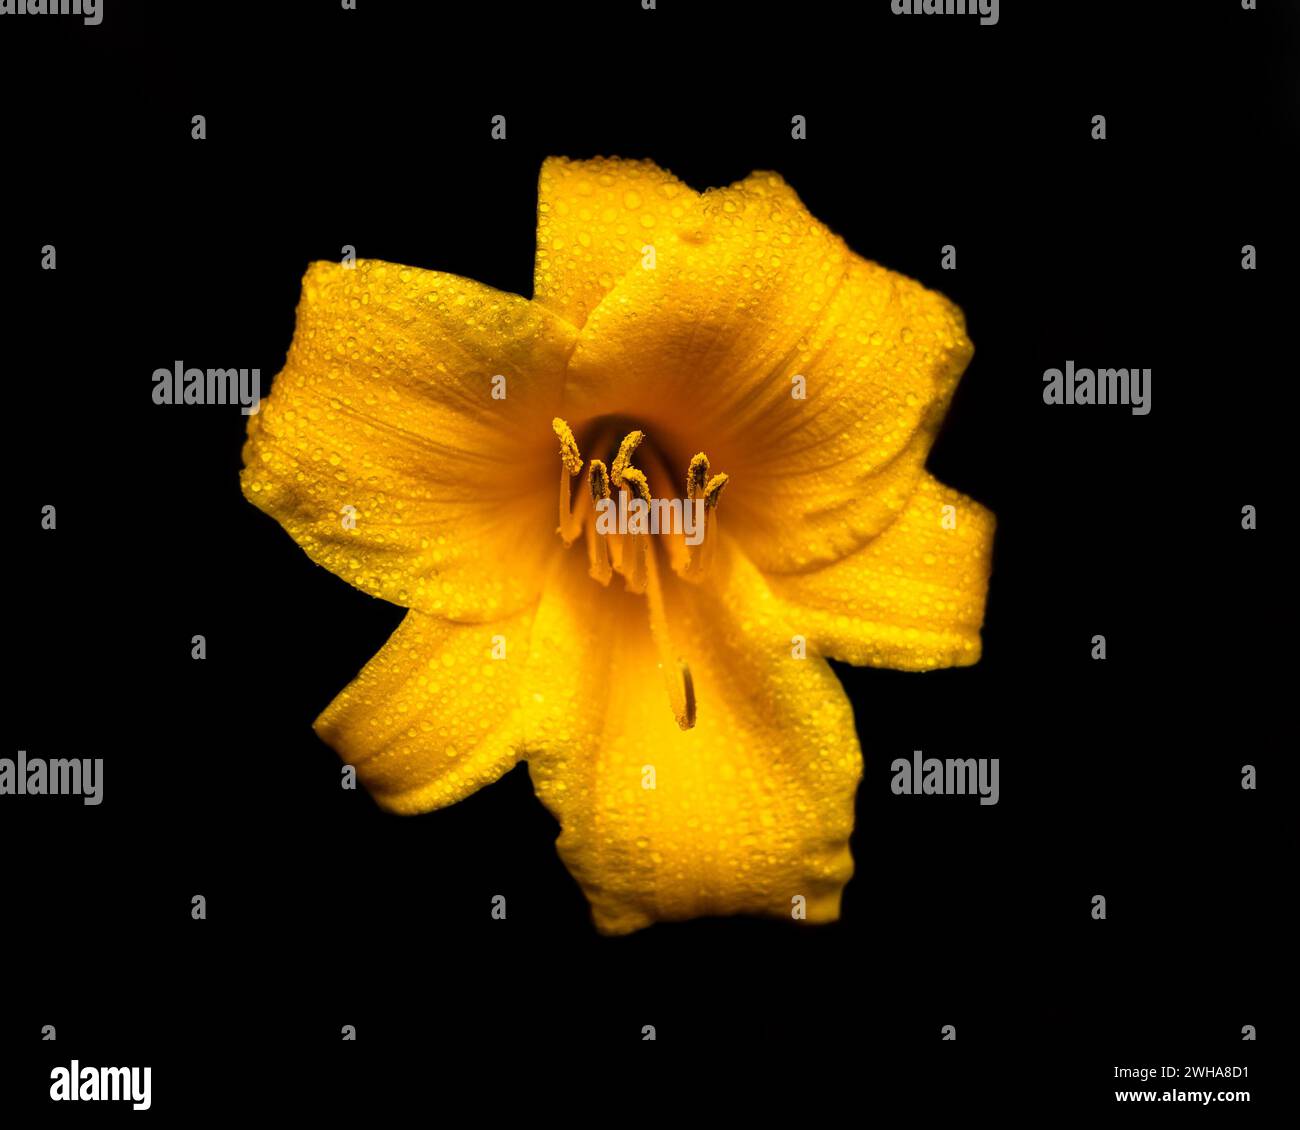 A vibrant yellow daylily flower set against dark background Stock Photo